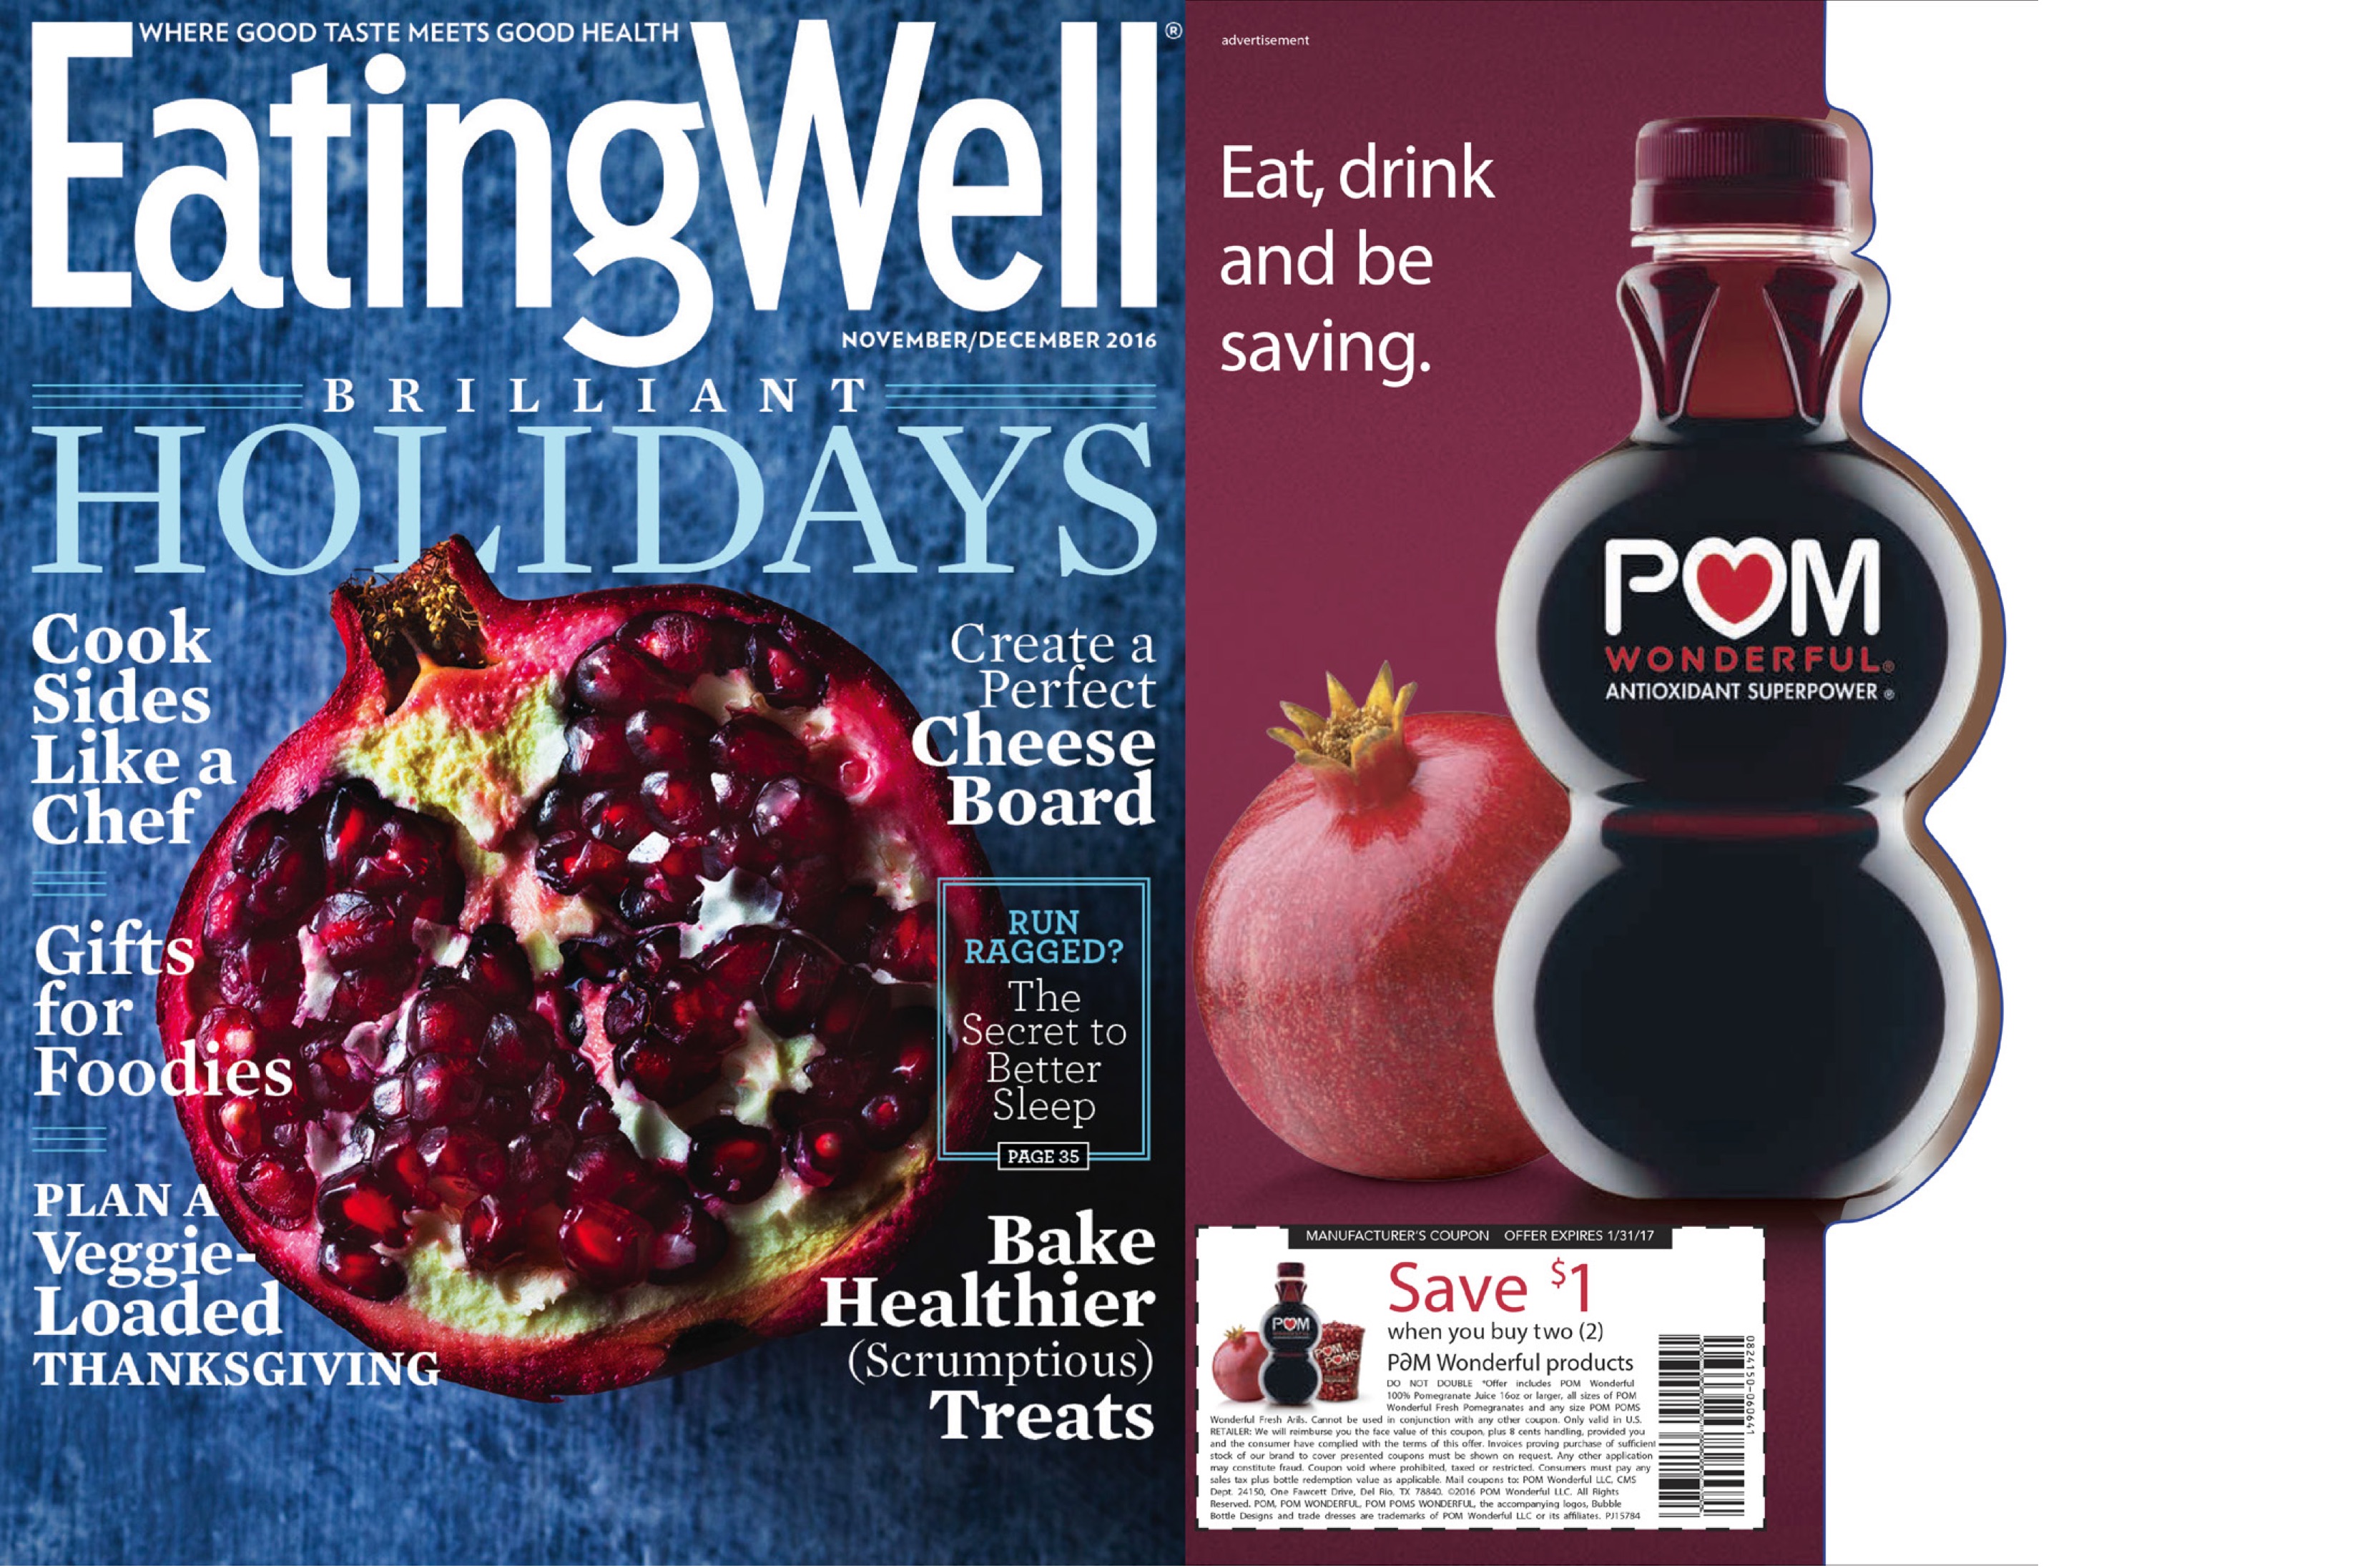 Images courtesy of Eating Well and POM Wonderful